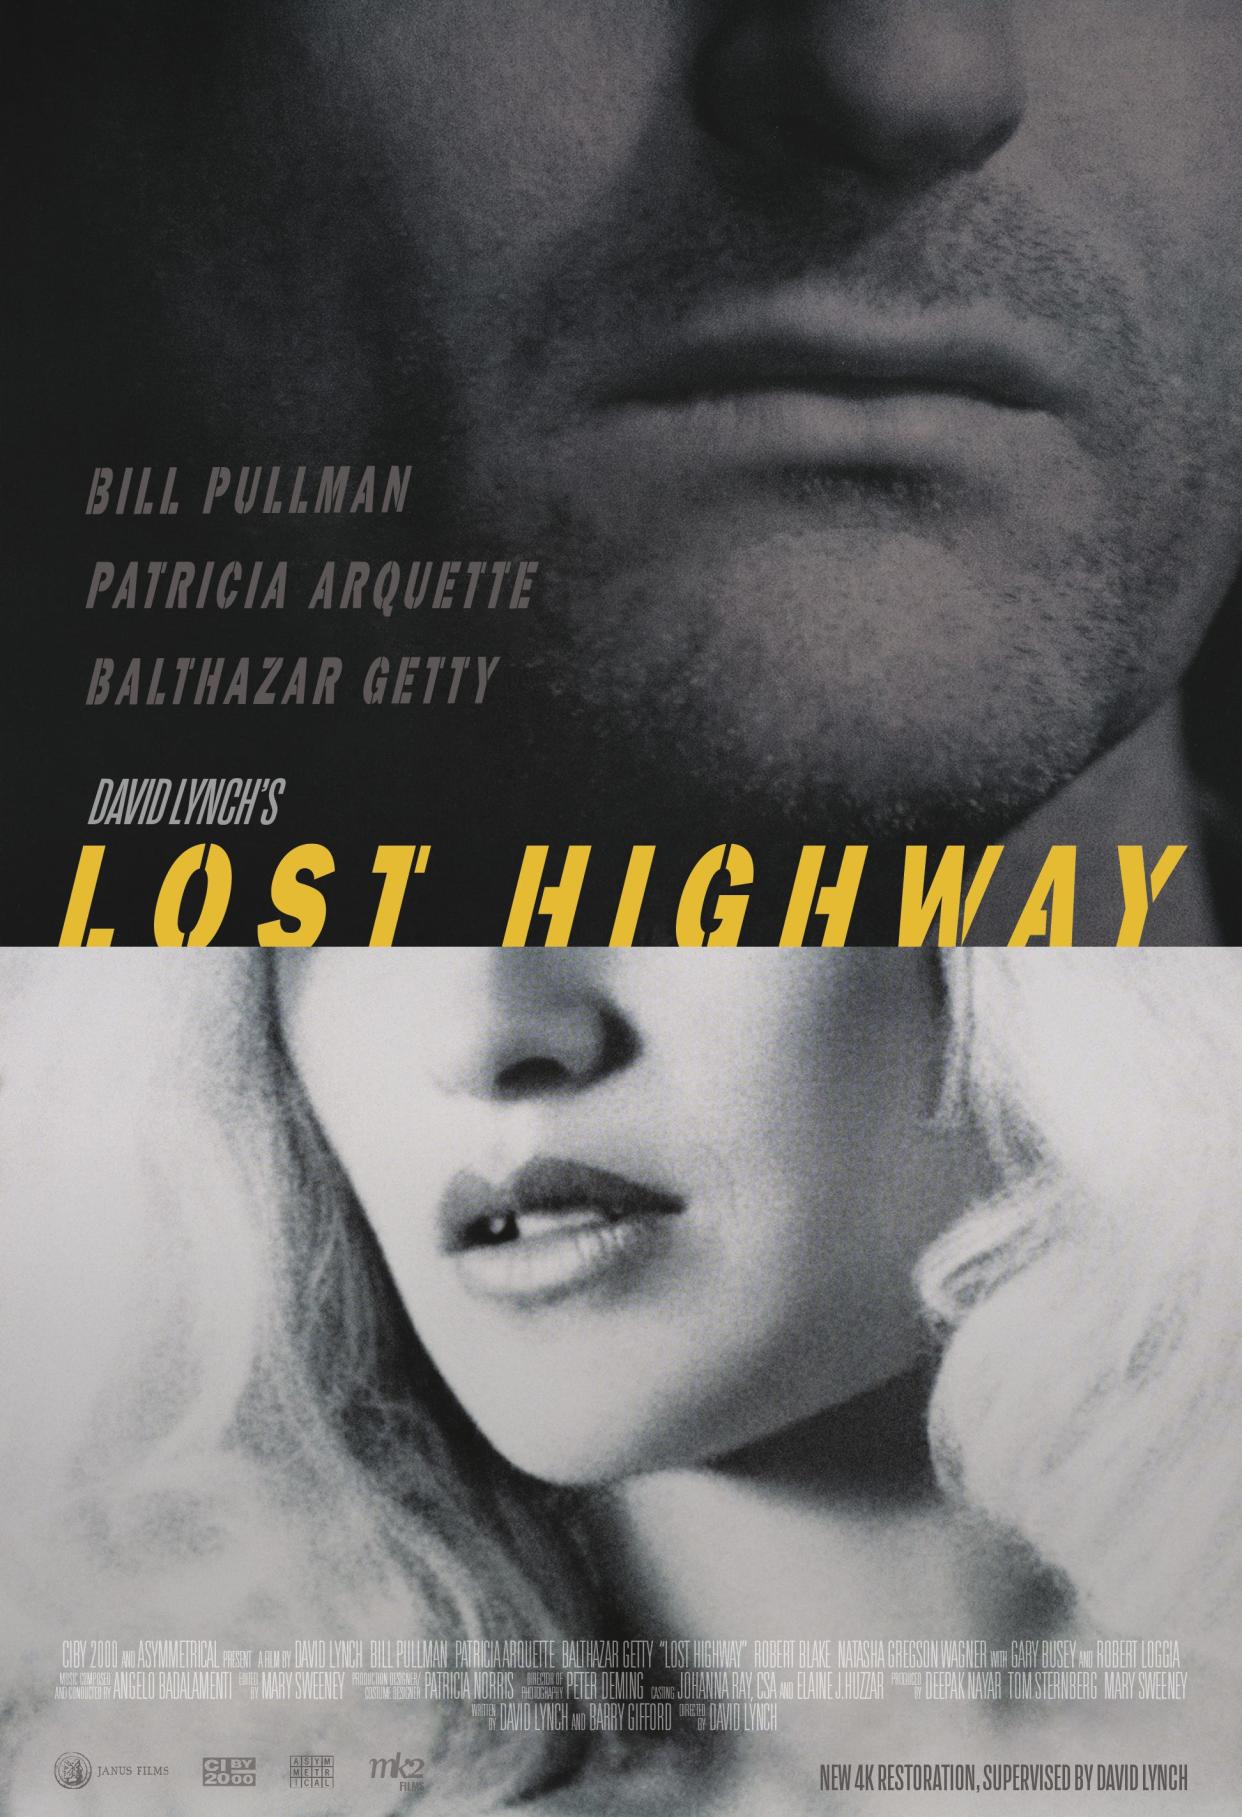 Poster for "Lost Highway," which will be shown at the IMAX theater for Tallahassee Film Festival, Sept. 3-4, 2022.